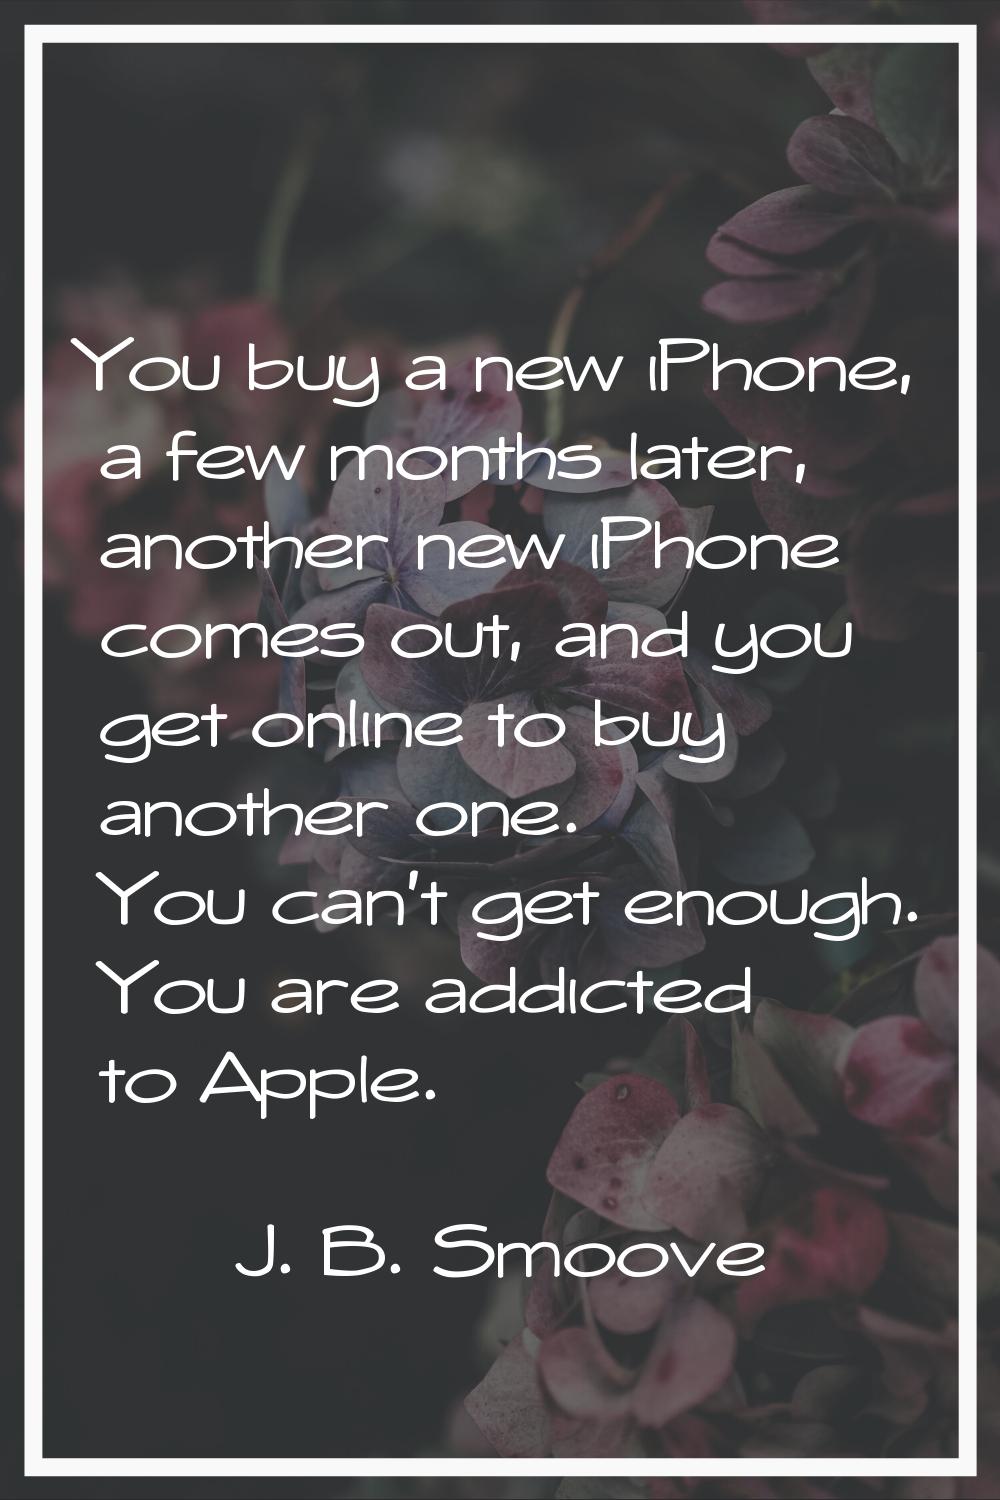 You buy a new iPhone, a few months later, another new iPhone comes out, and you get online to buy a